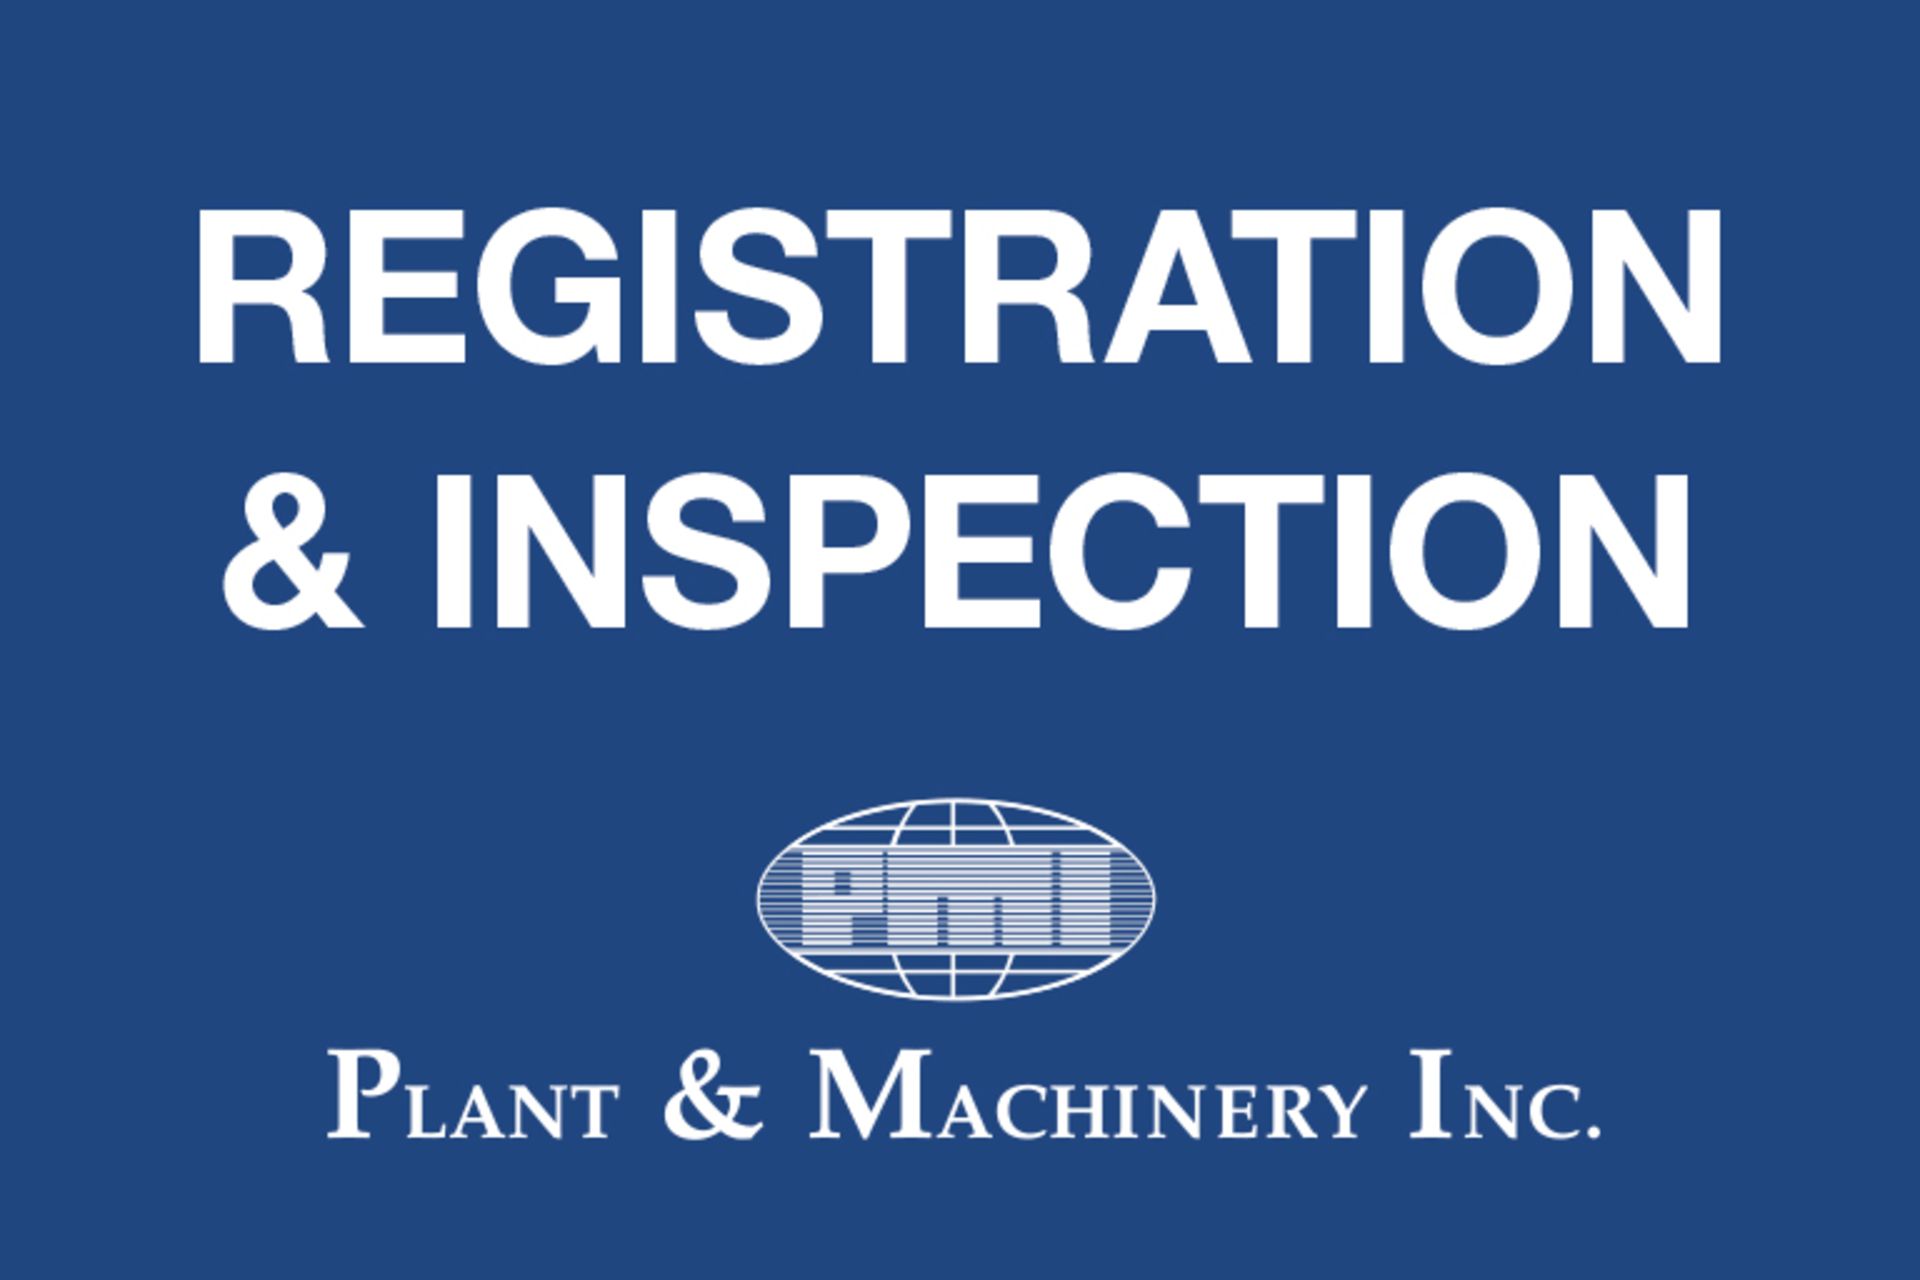 INSPECTION FOR THIS AUCTION WILL BE MONDAY, APRIL 15, 9:00 A.M. TO 4:00 P.M.